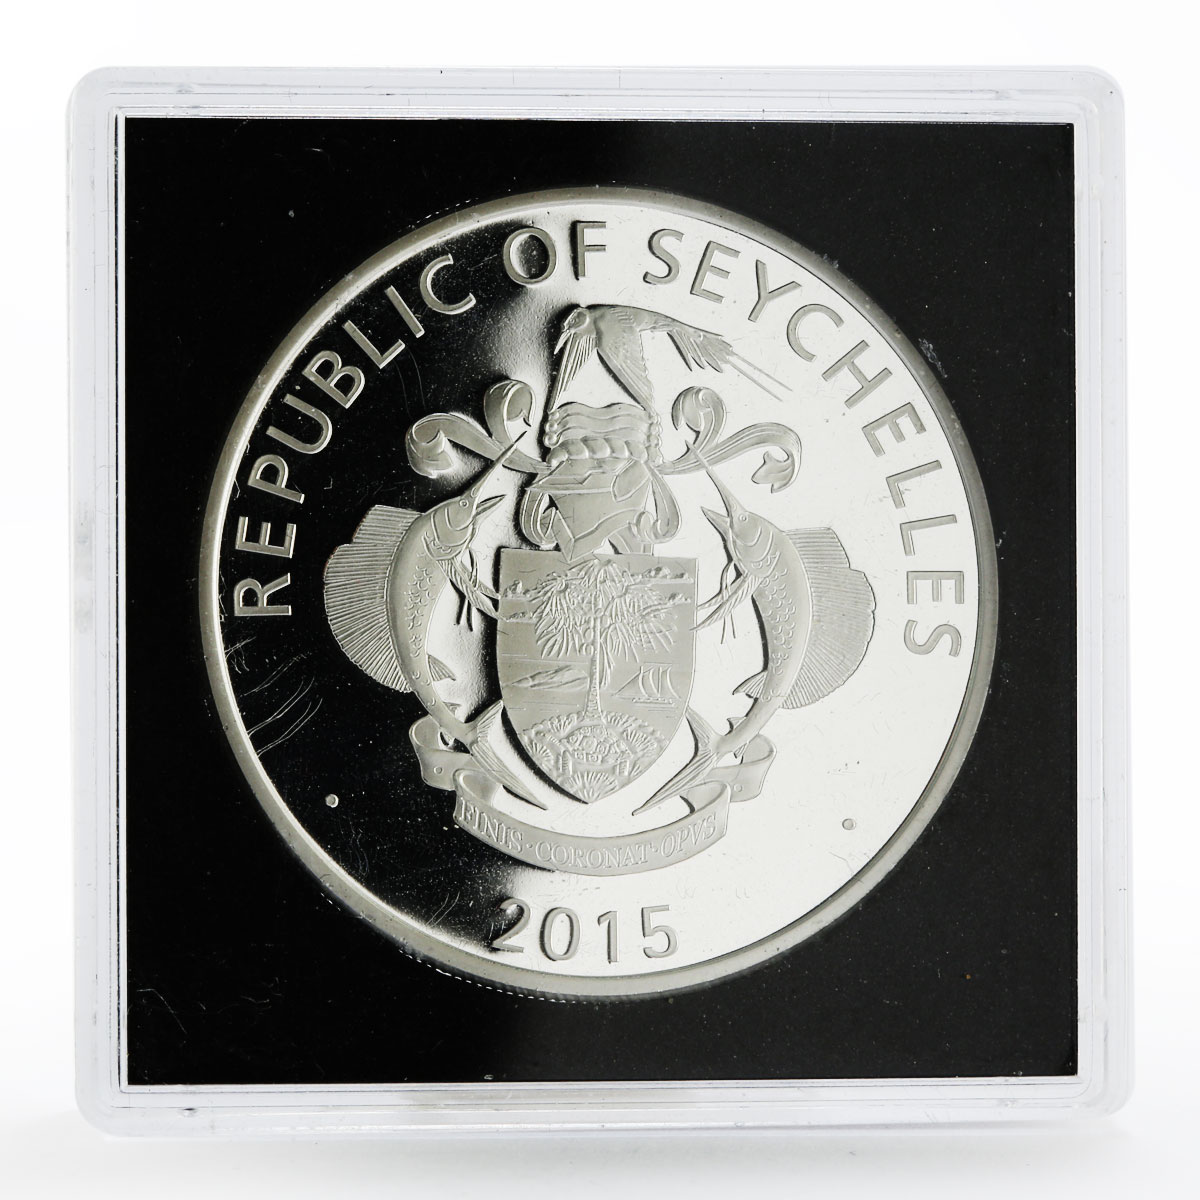 Seychelles 10 rupees History of Seafaring series Pamir Ship silver coin 2015